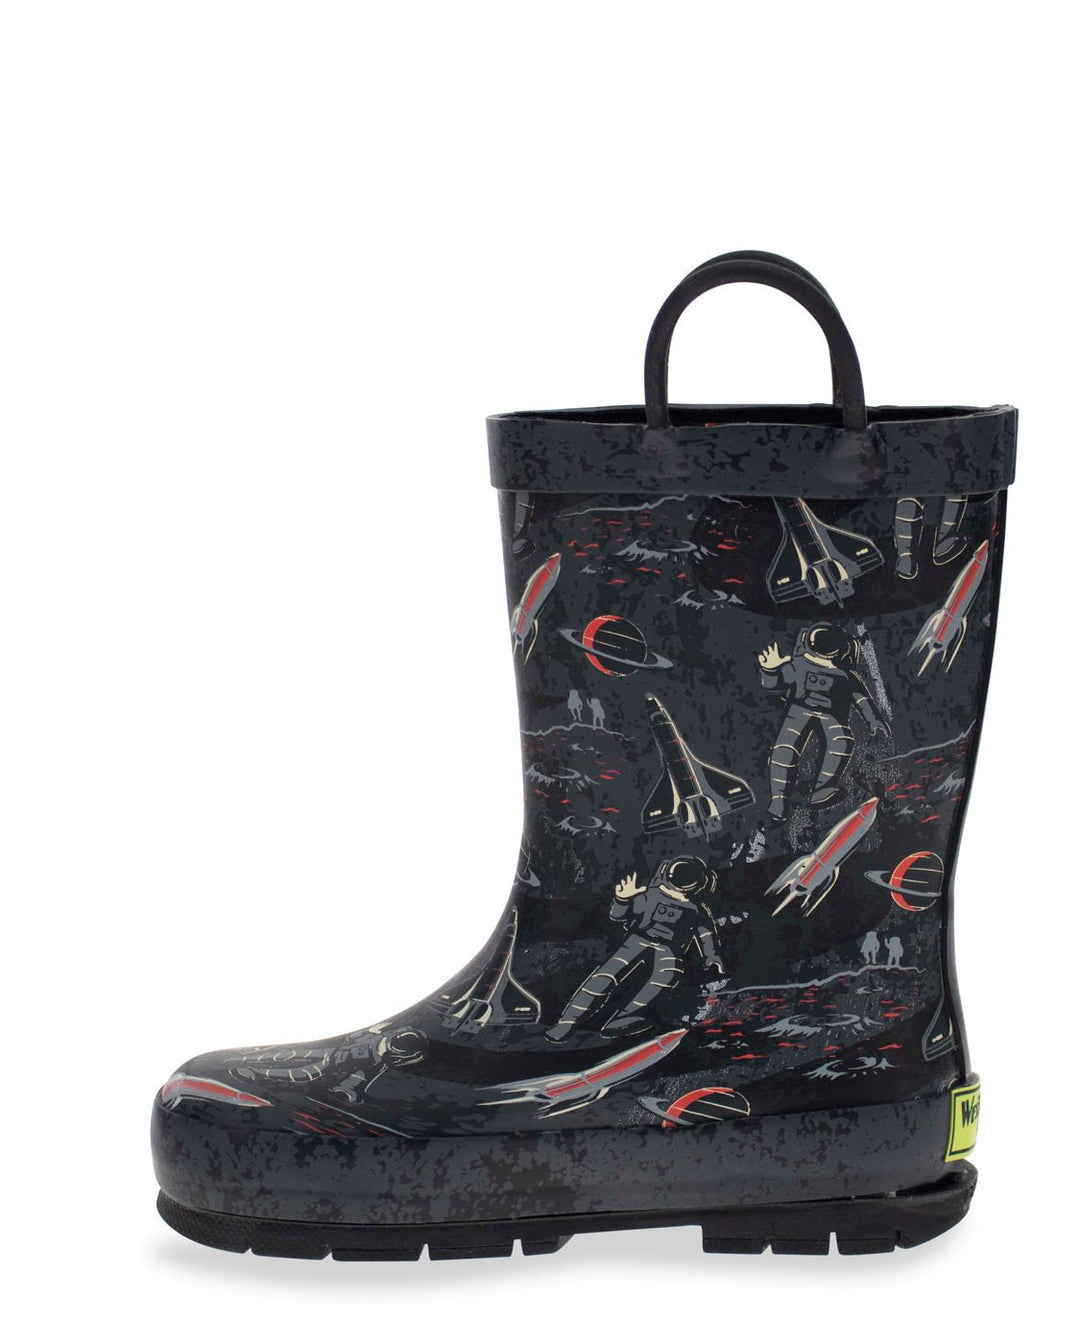 Kids Space Tour Rain Boot - Charcoal - Western Chief